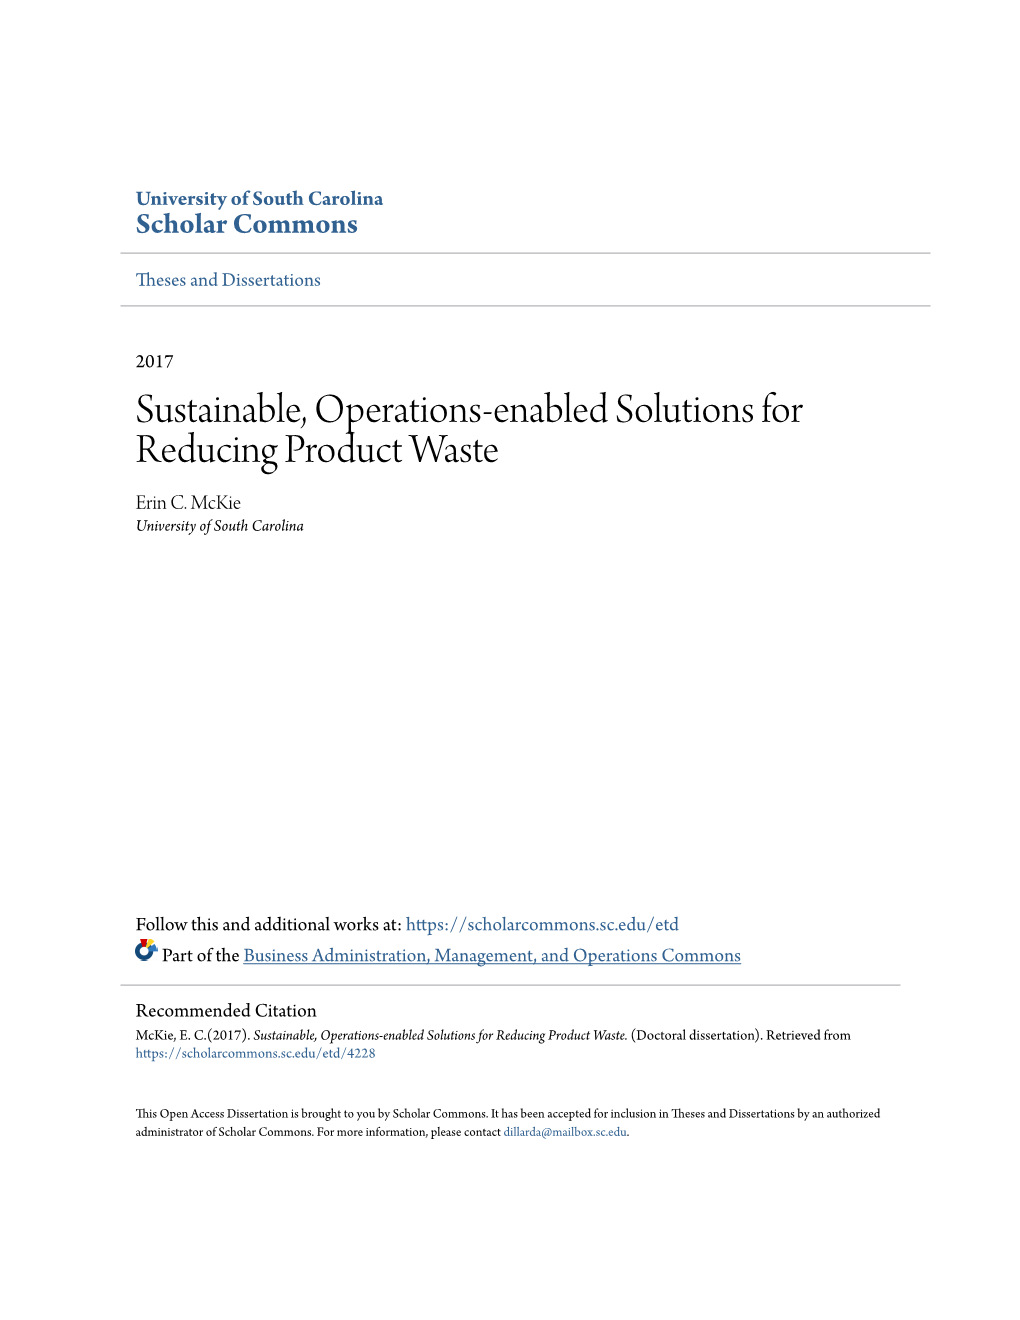 Sustainable, Operations-Enabled Solutions for Reducing Product Waste Erin C